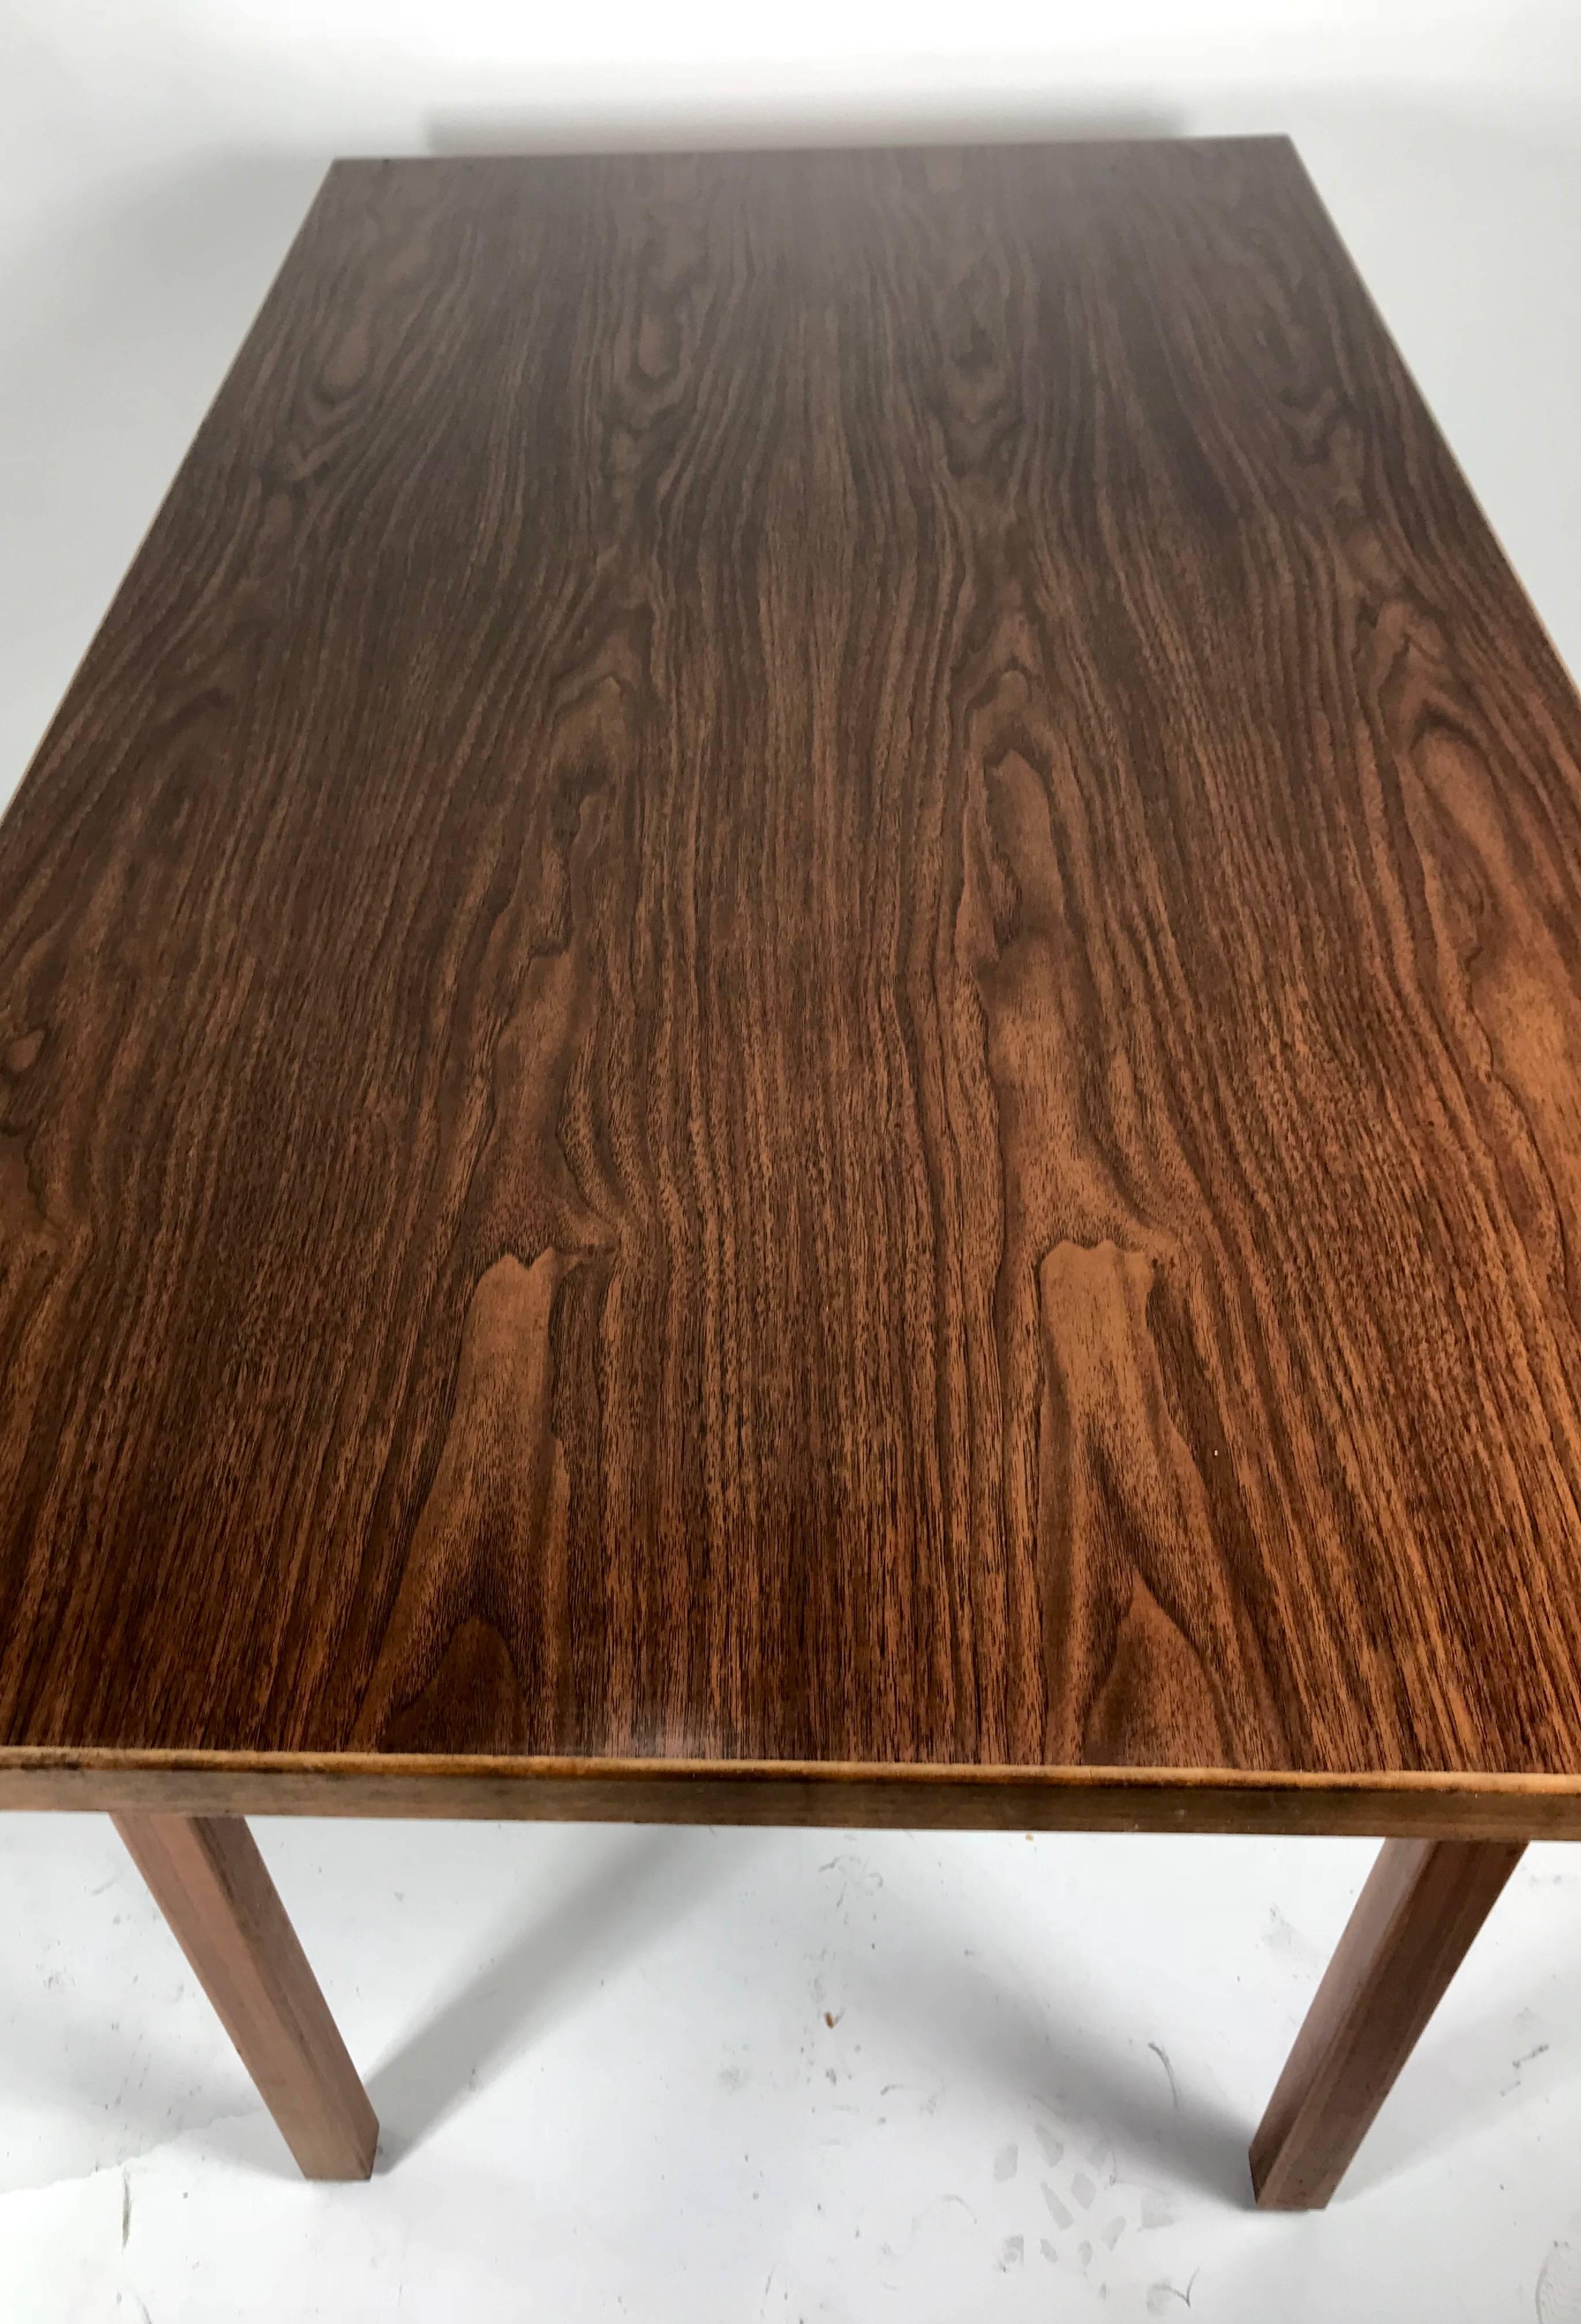 American Classic Modernist Table or Desk Designed by Jens Risom